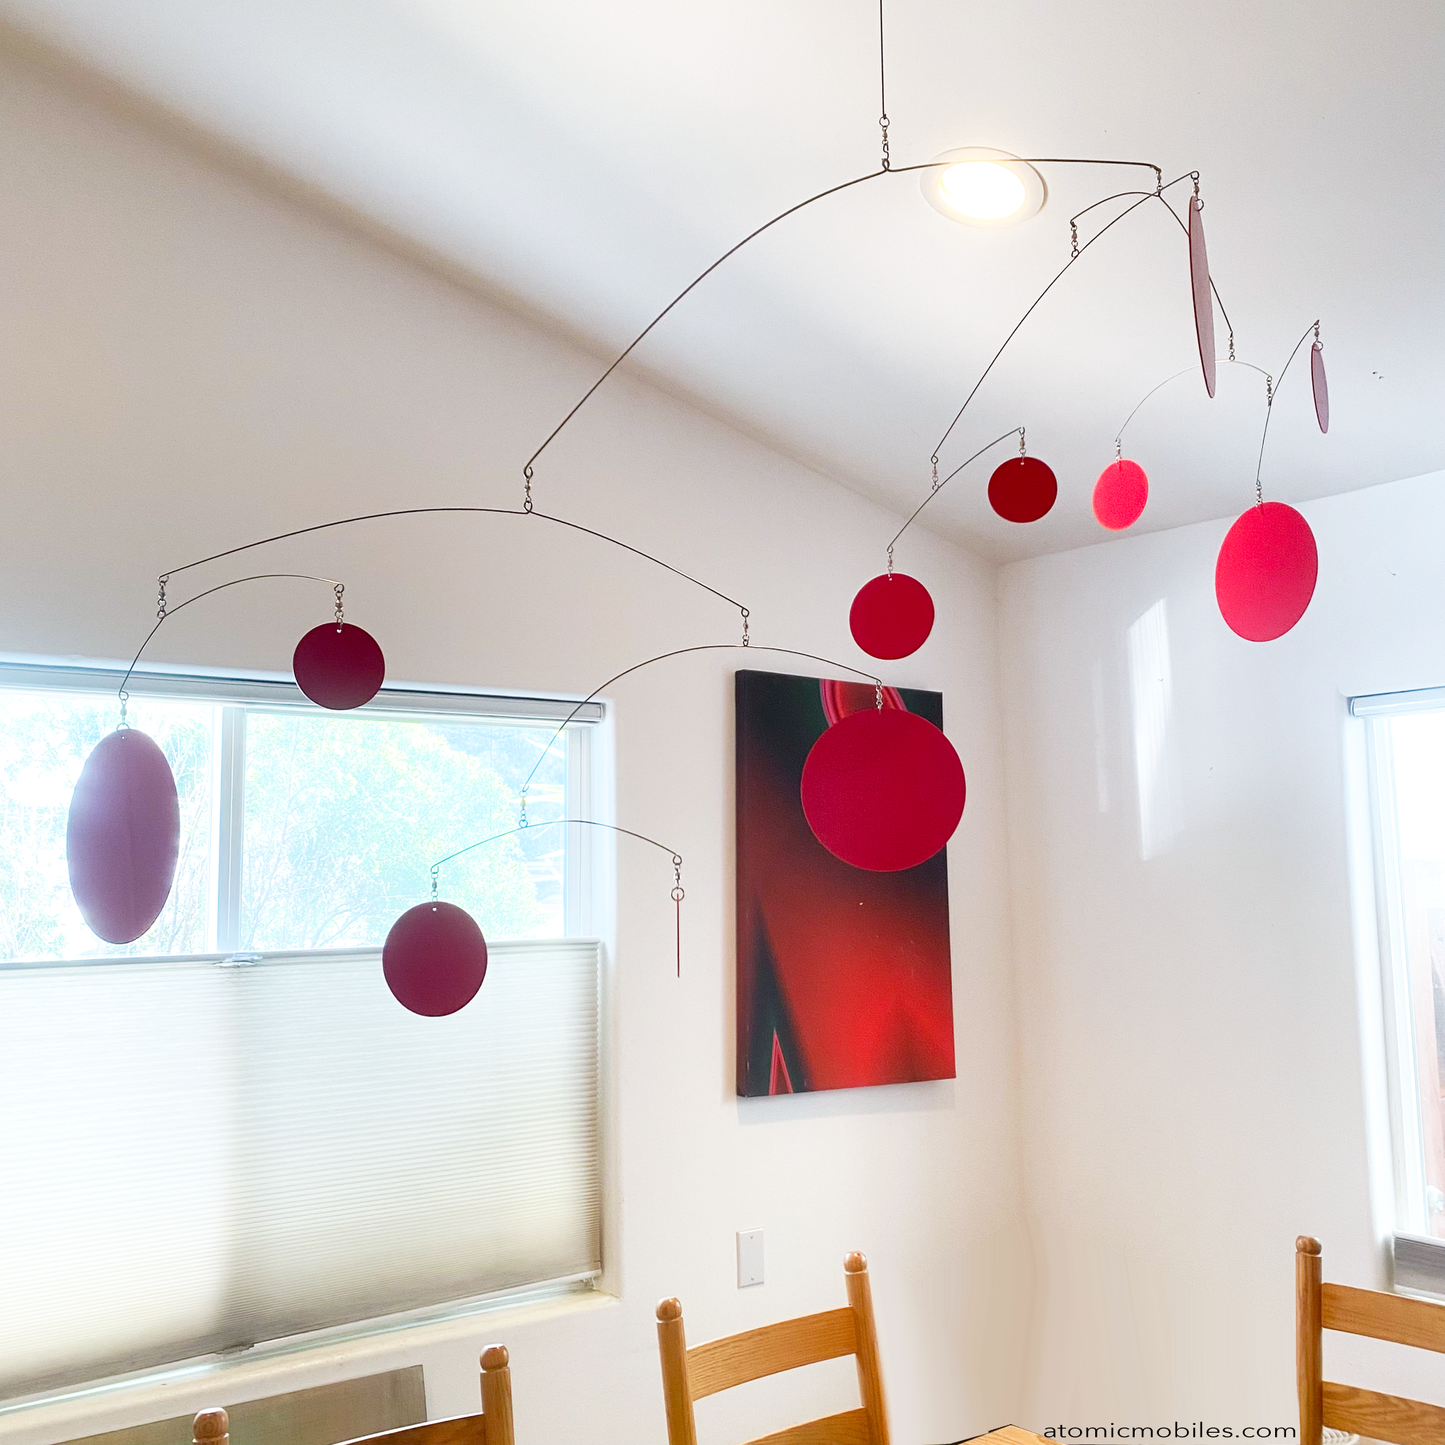 Closeup of XL Red Kinetic Hangng Art Mobile by AtomicMobiles.com - large red circles in large mobile in dining room over wood table made in Los Angeles